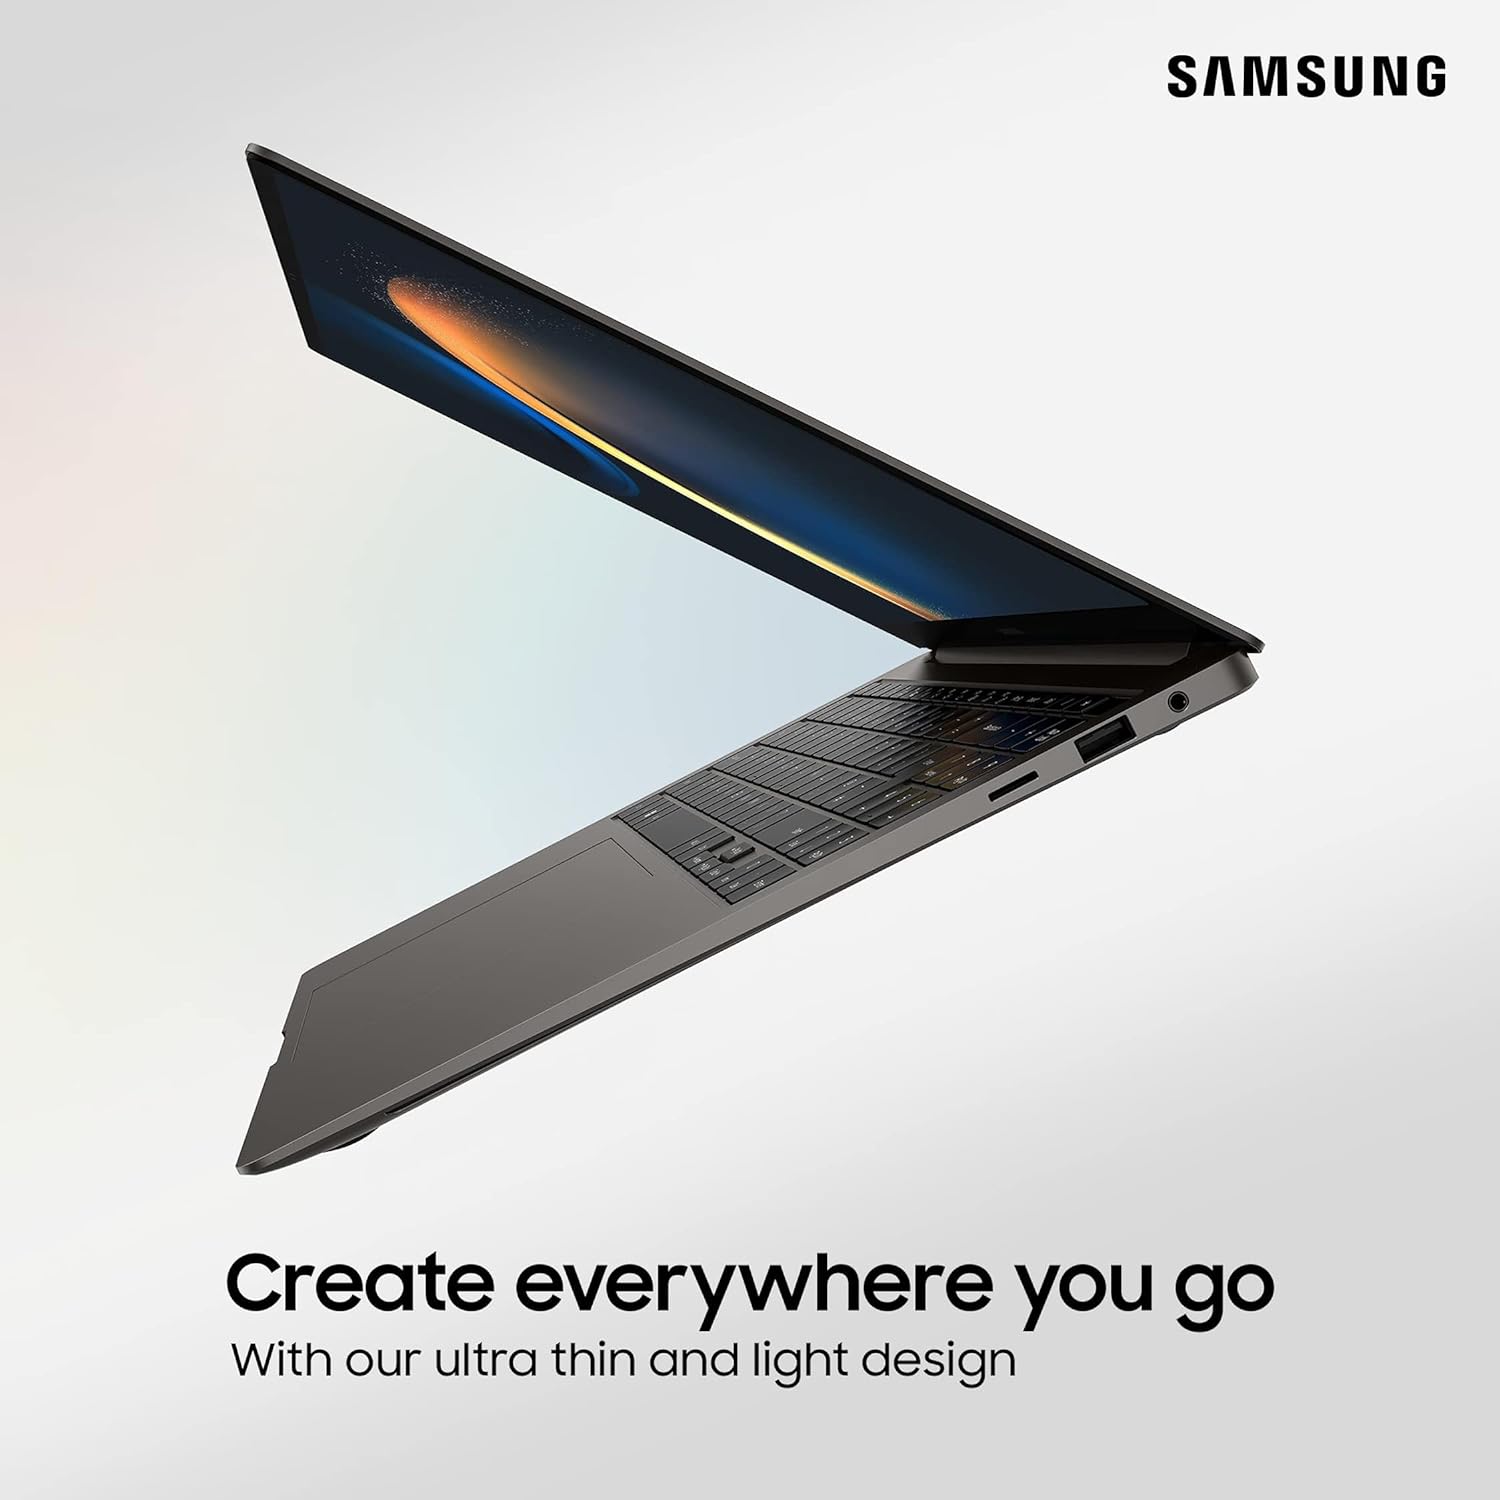 Samsung Galaxy Book3 Pro Wi - Fi Laptop, 16 Inch, 13th gen Intel Core i5 Processor, 8GB RAM, 256GB Storage, Graphite - Official   Import  Single ASIN  Import  Multiple ASIN ×Product customization General Description Gallery Reviews Var - Amazing Gadgets Outlet